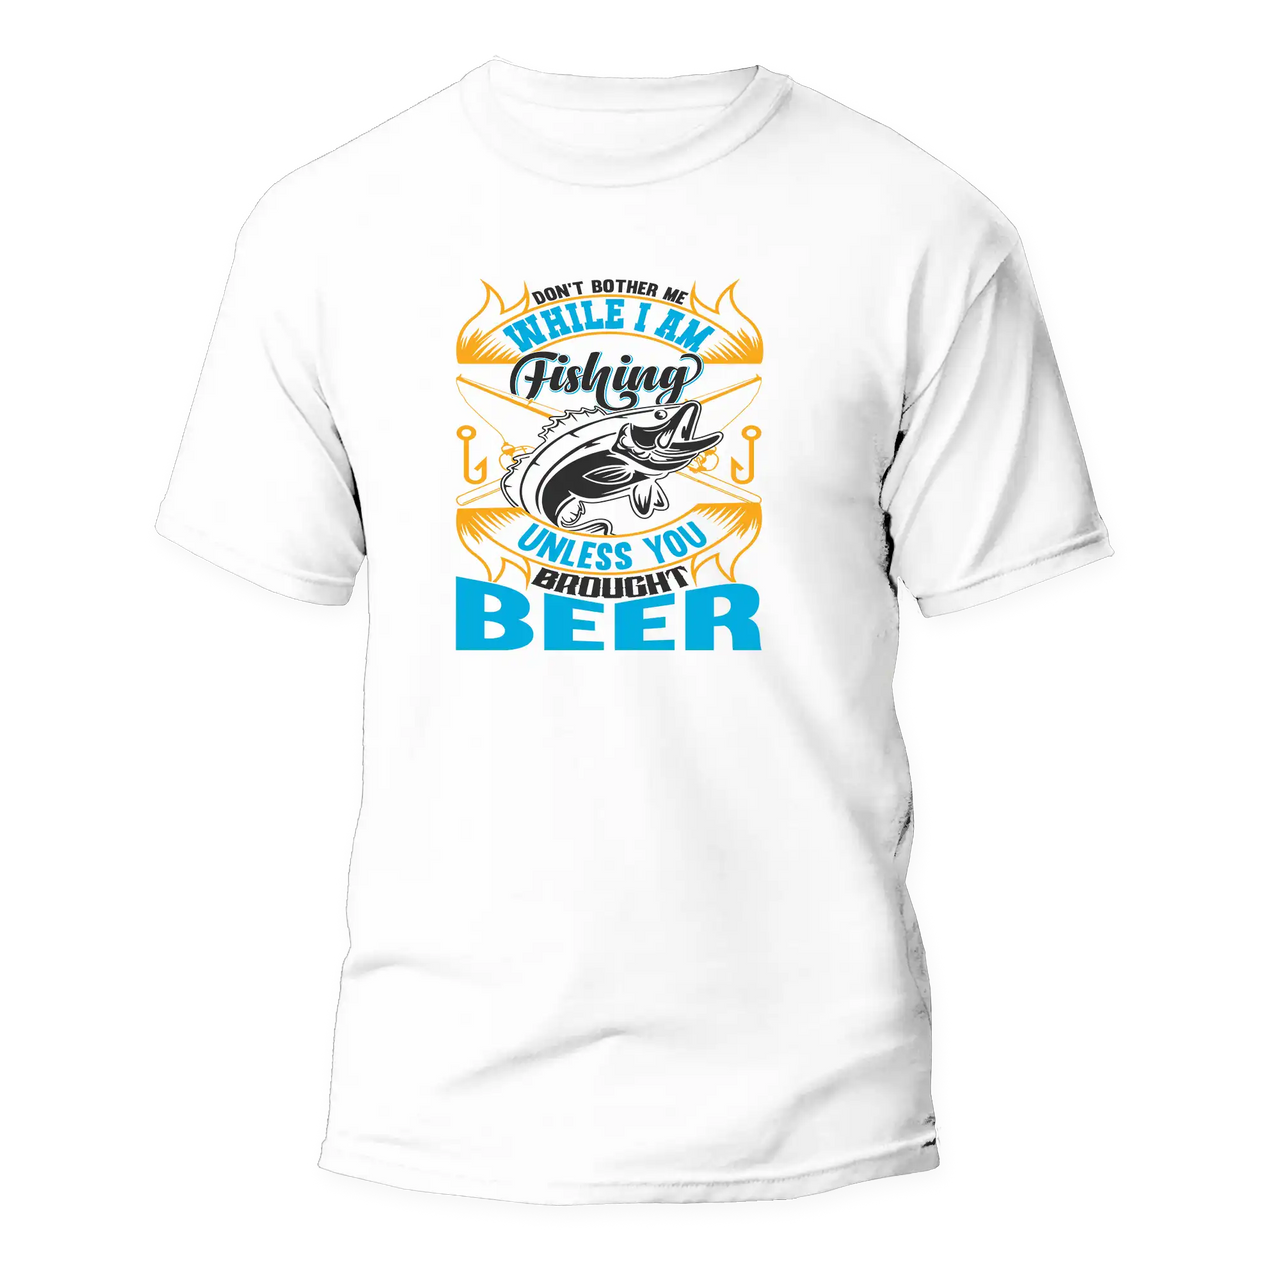 Don't Bother Me While I'm Fishing Man T-Shirt